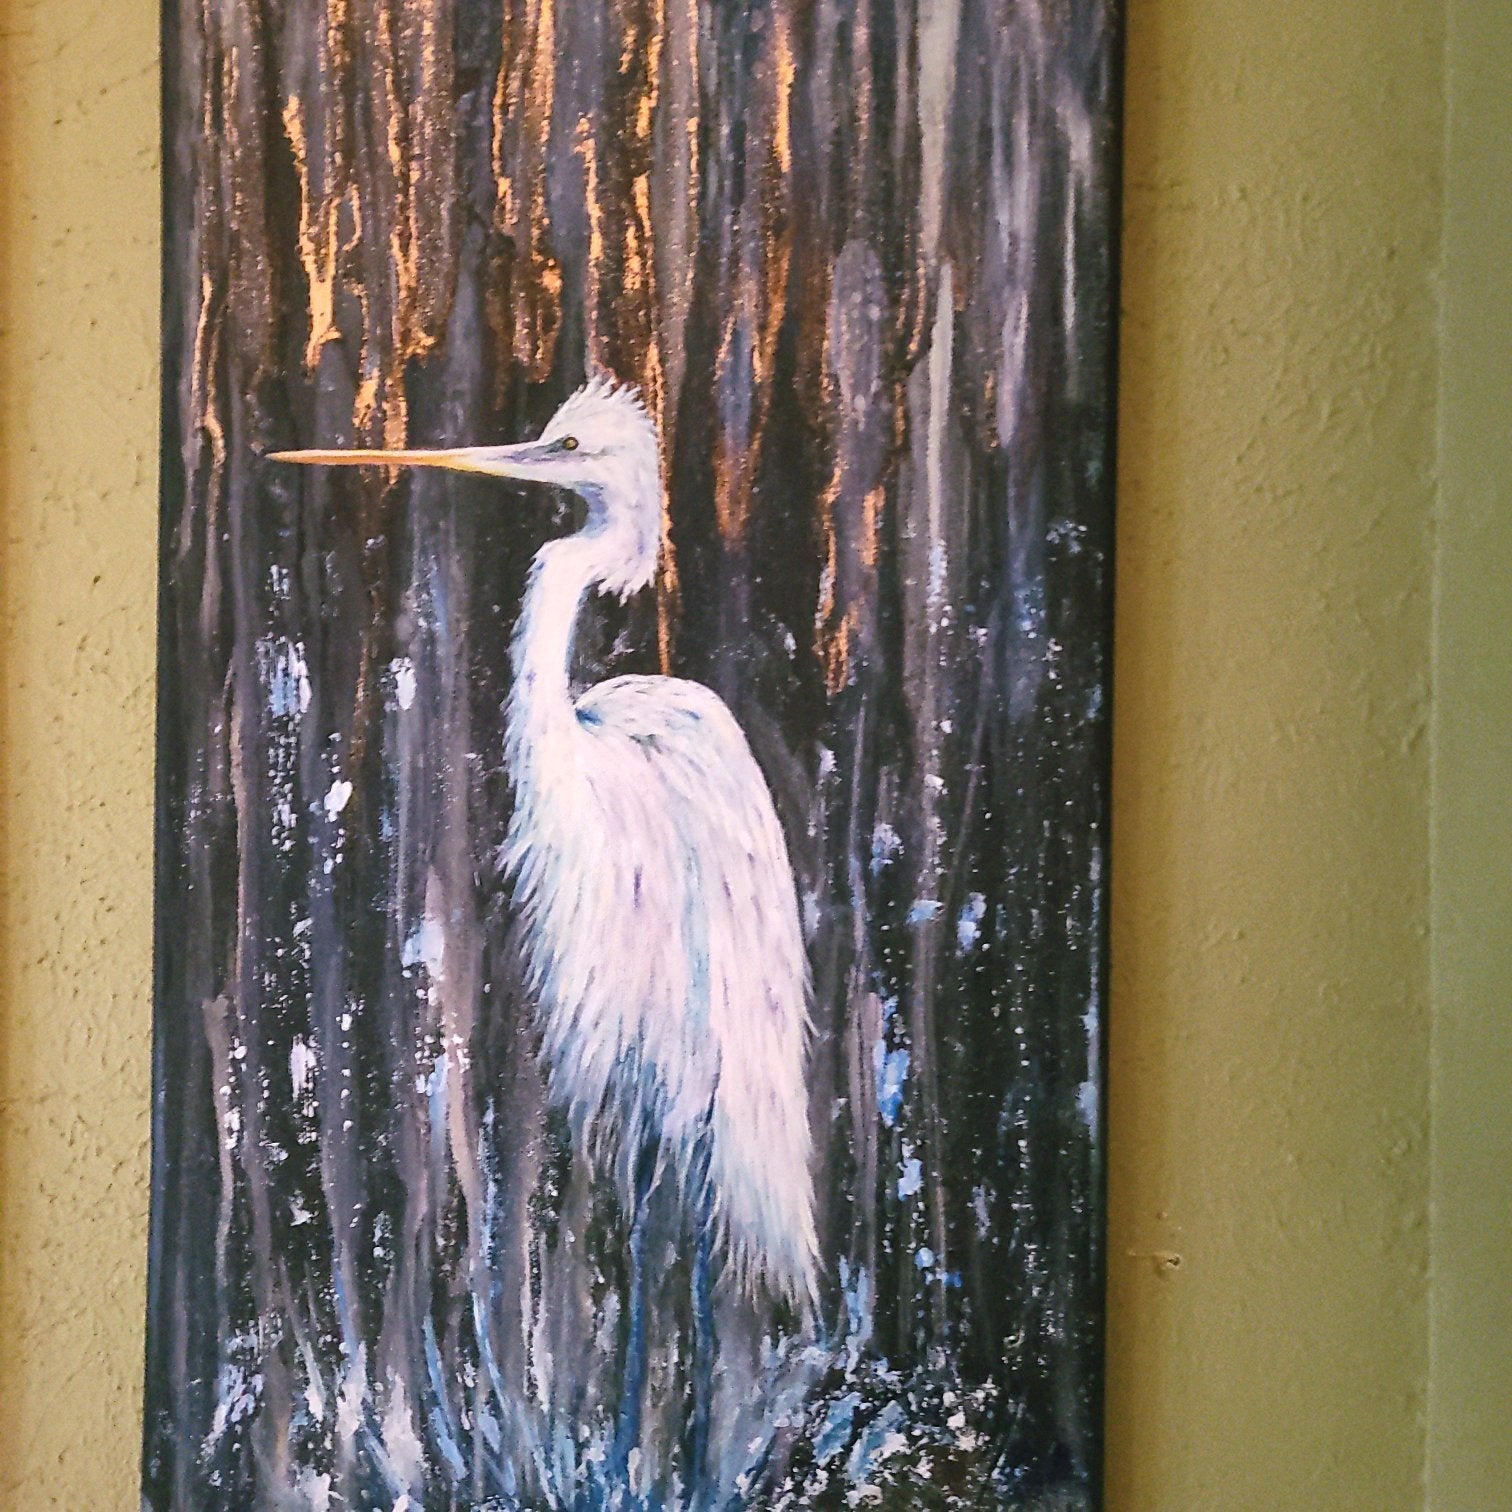 A stunning artwork of a white heron, created using alcohol ink and acrylic painting techniques, displayed on a wall. Produced by The Artful Lynk, Fine Art by Lynda Krupa.